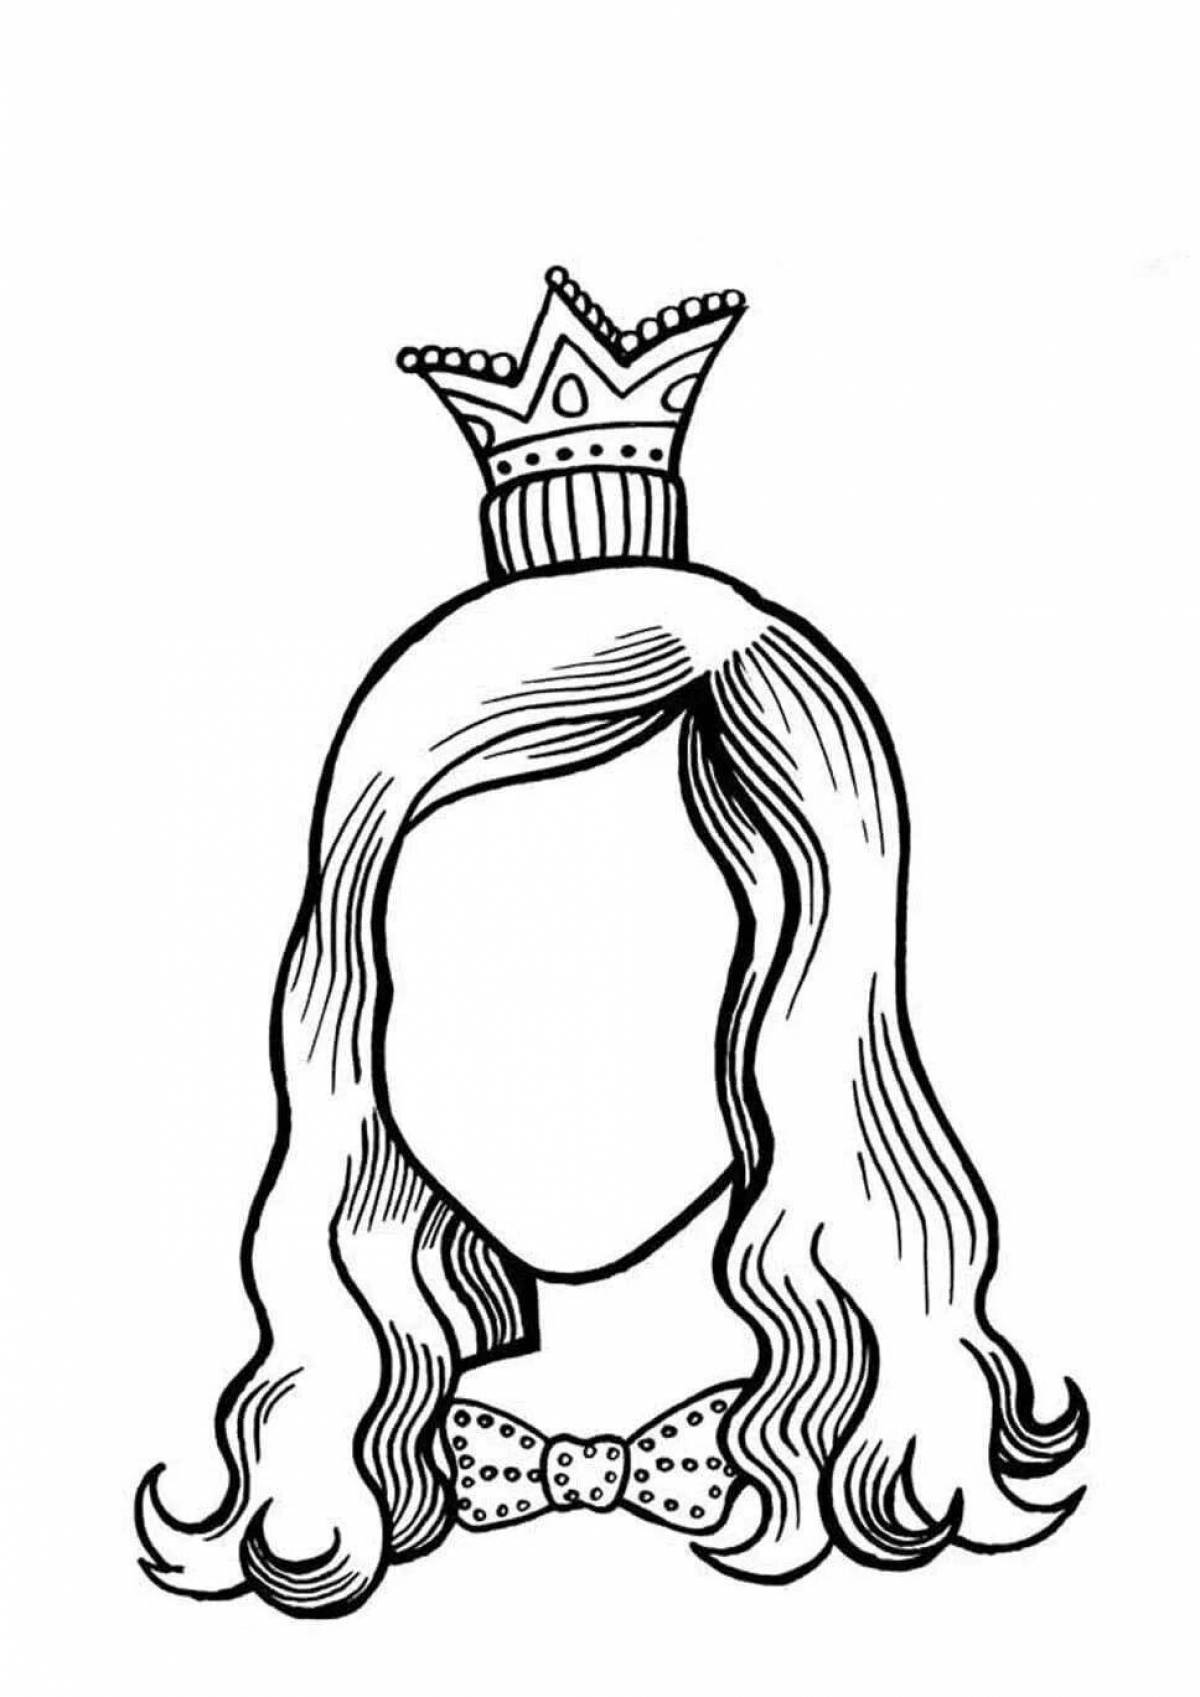 Live face coloring page